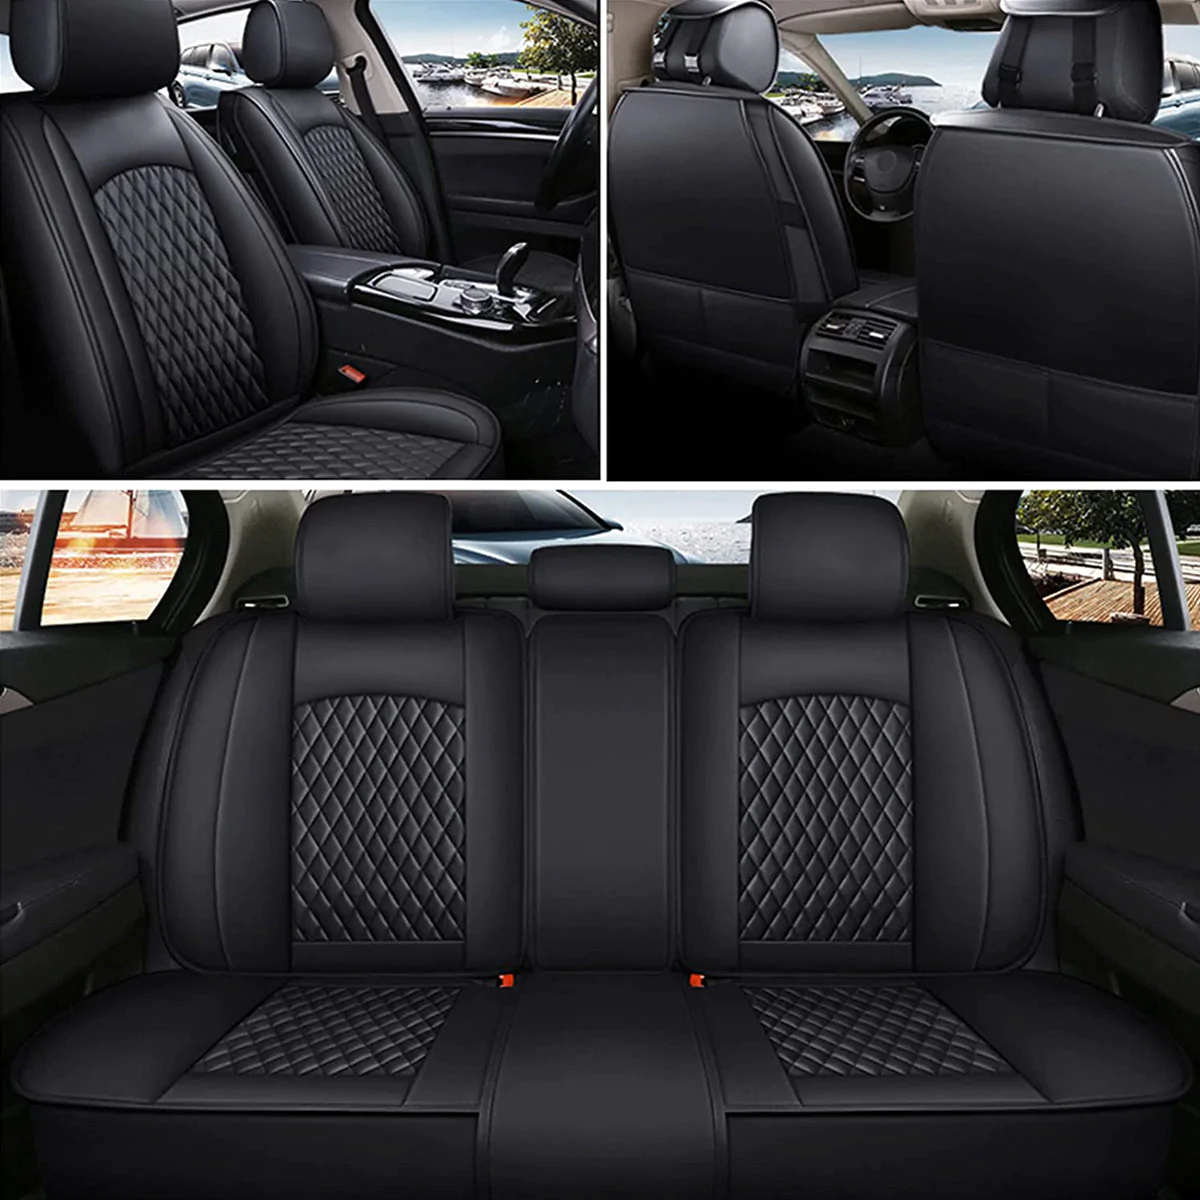 Custom Text For Seat Covers 5 Seats Full Set, Custom Fit For Your Cars, Leatherette Automotive Seat Cushion Protector Universal Fit, Vehicle Auto Interior Decor KX13988